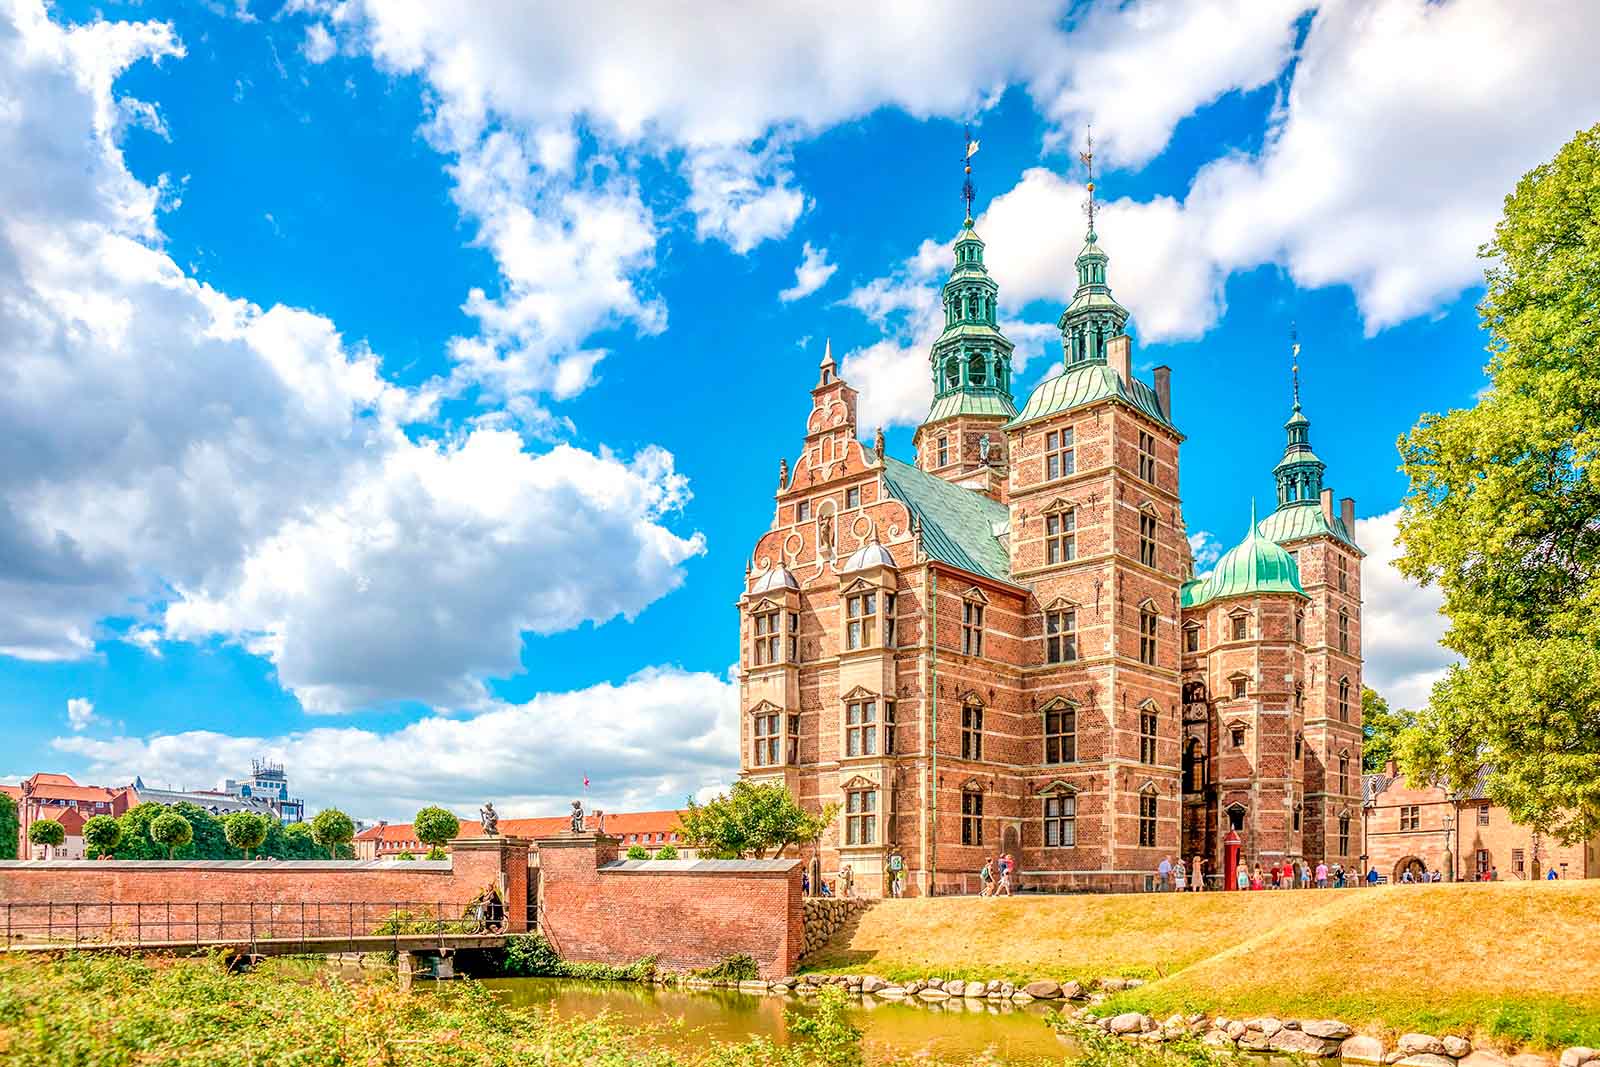 Discover the history of the Danish monarchy at the Rosenborg Castle